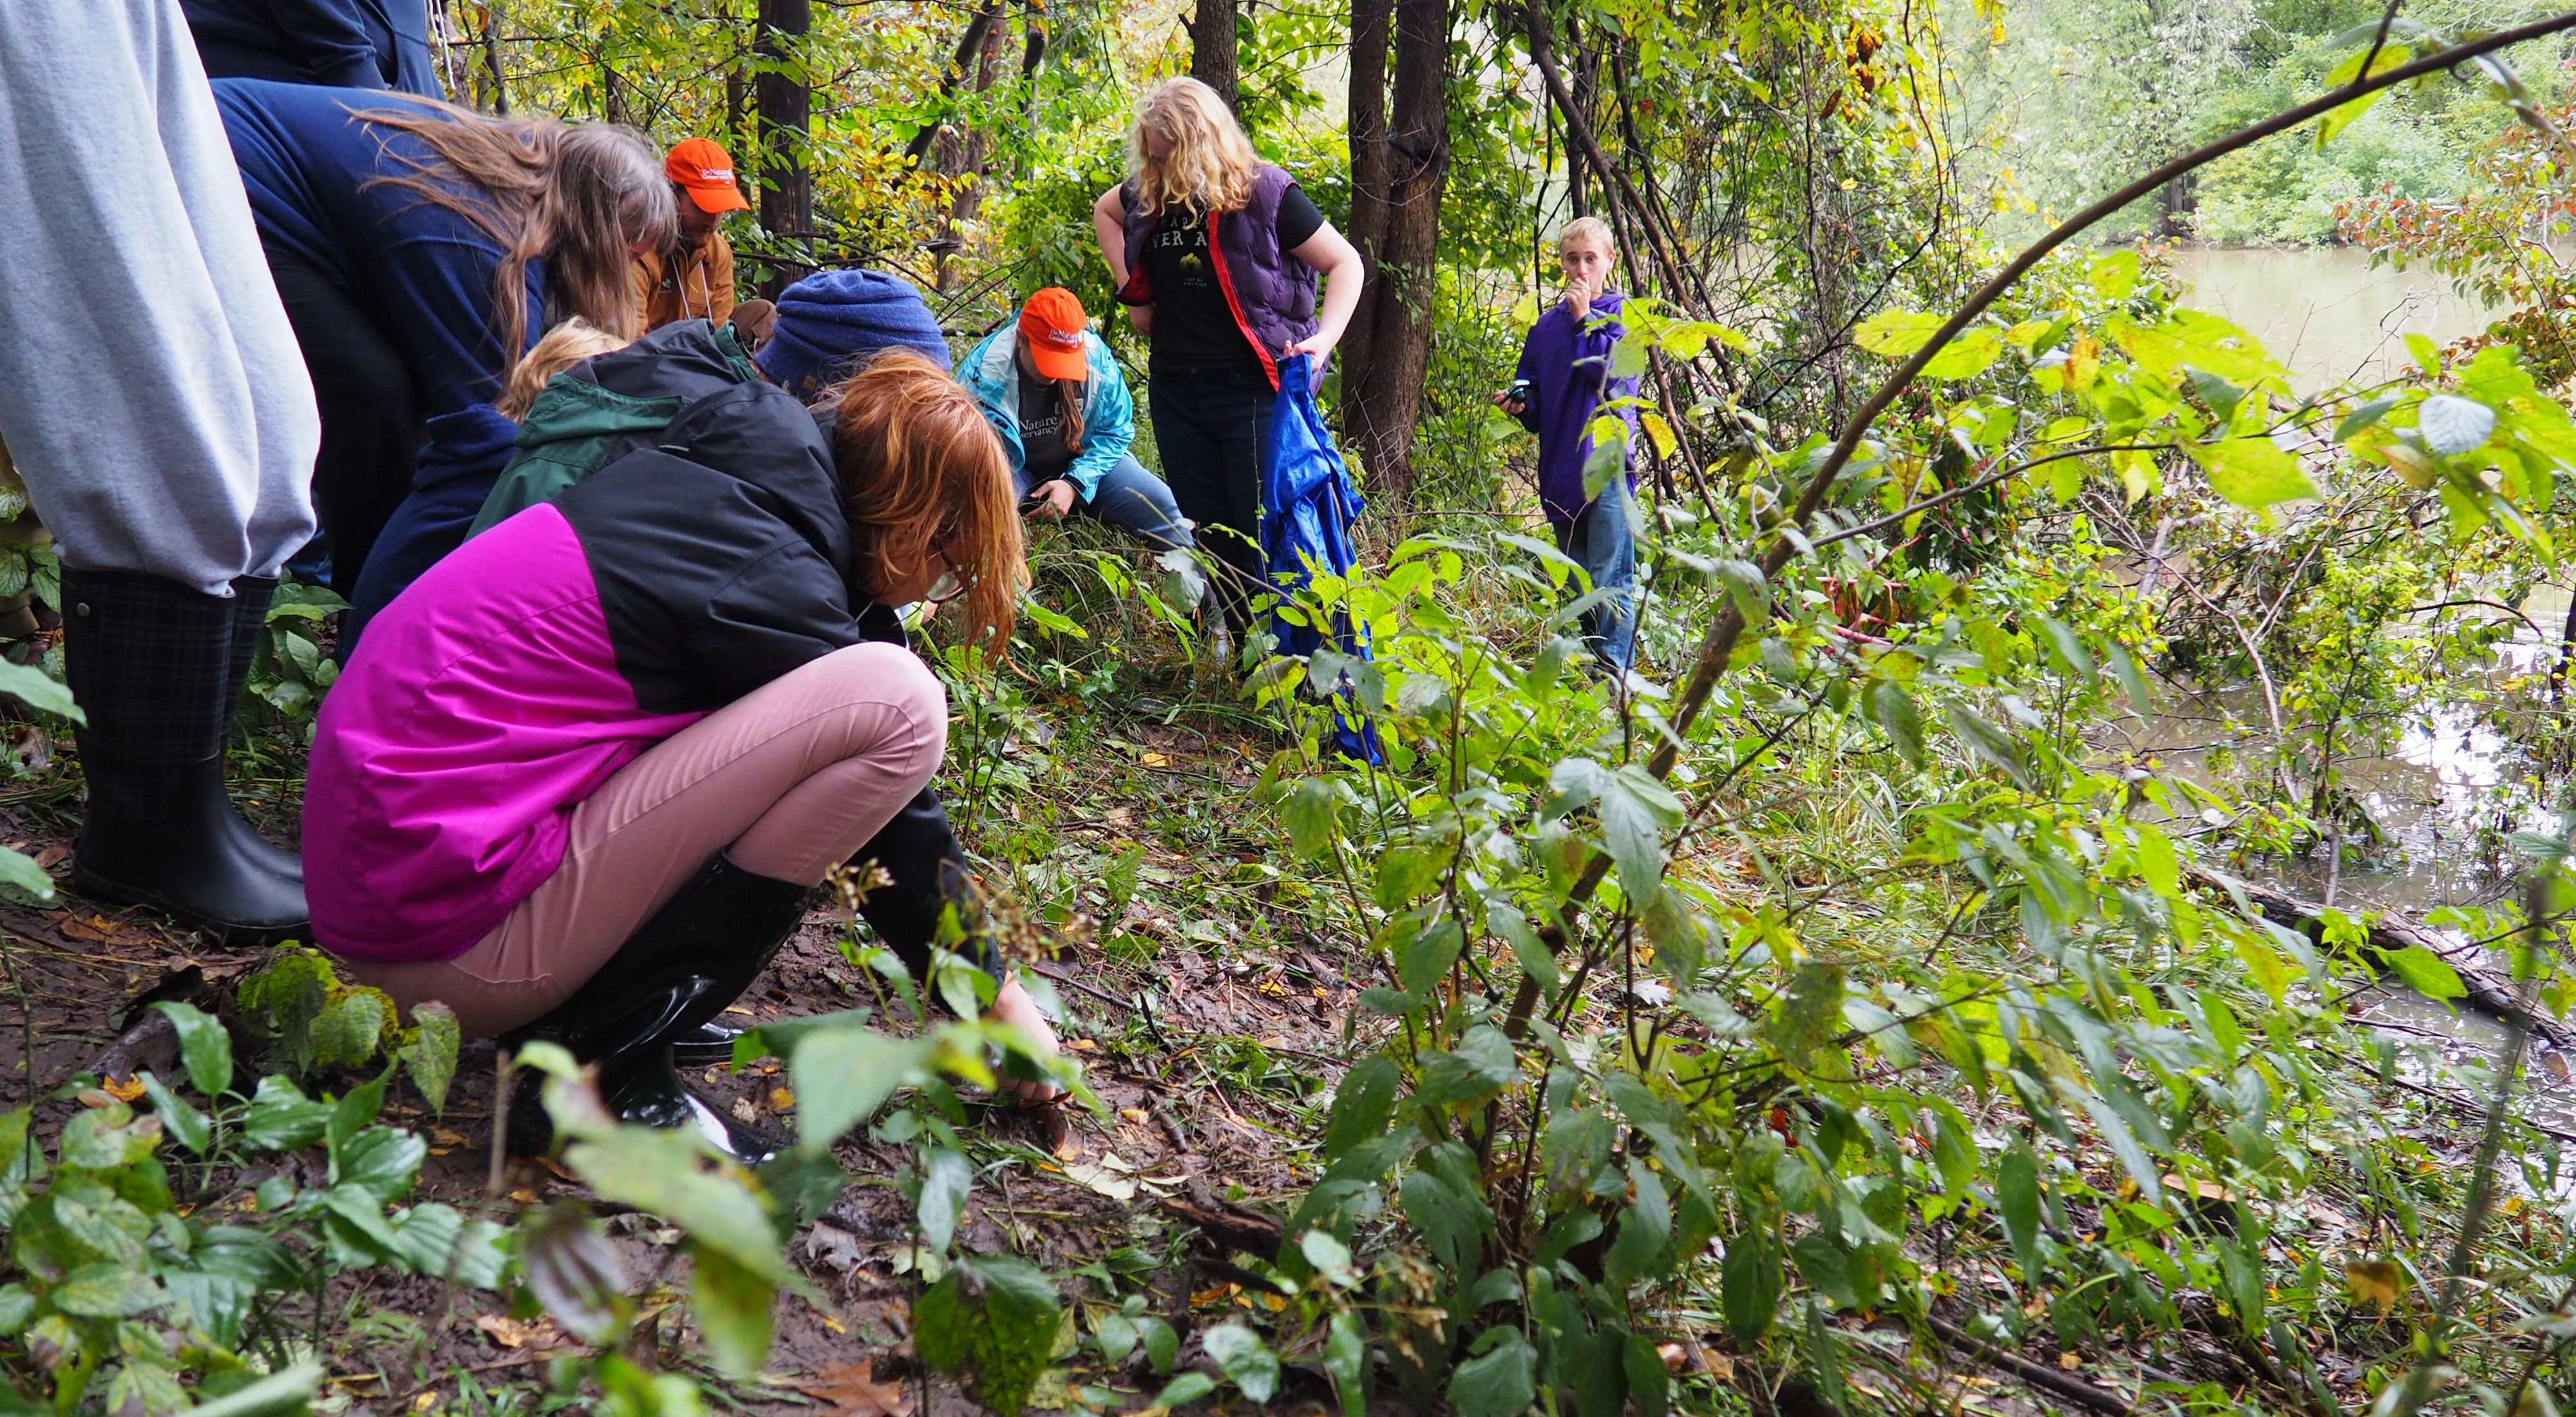 Swamp Stomp attendees and TNC staff explore nature at the Swamp White Oak Preserve